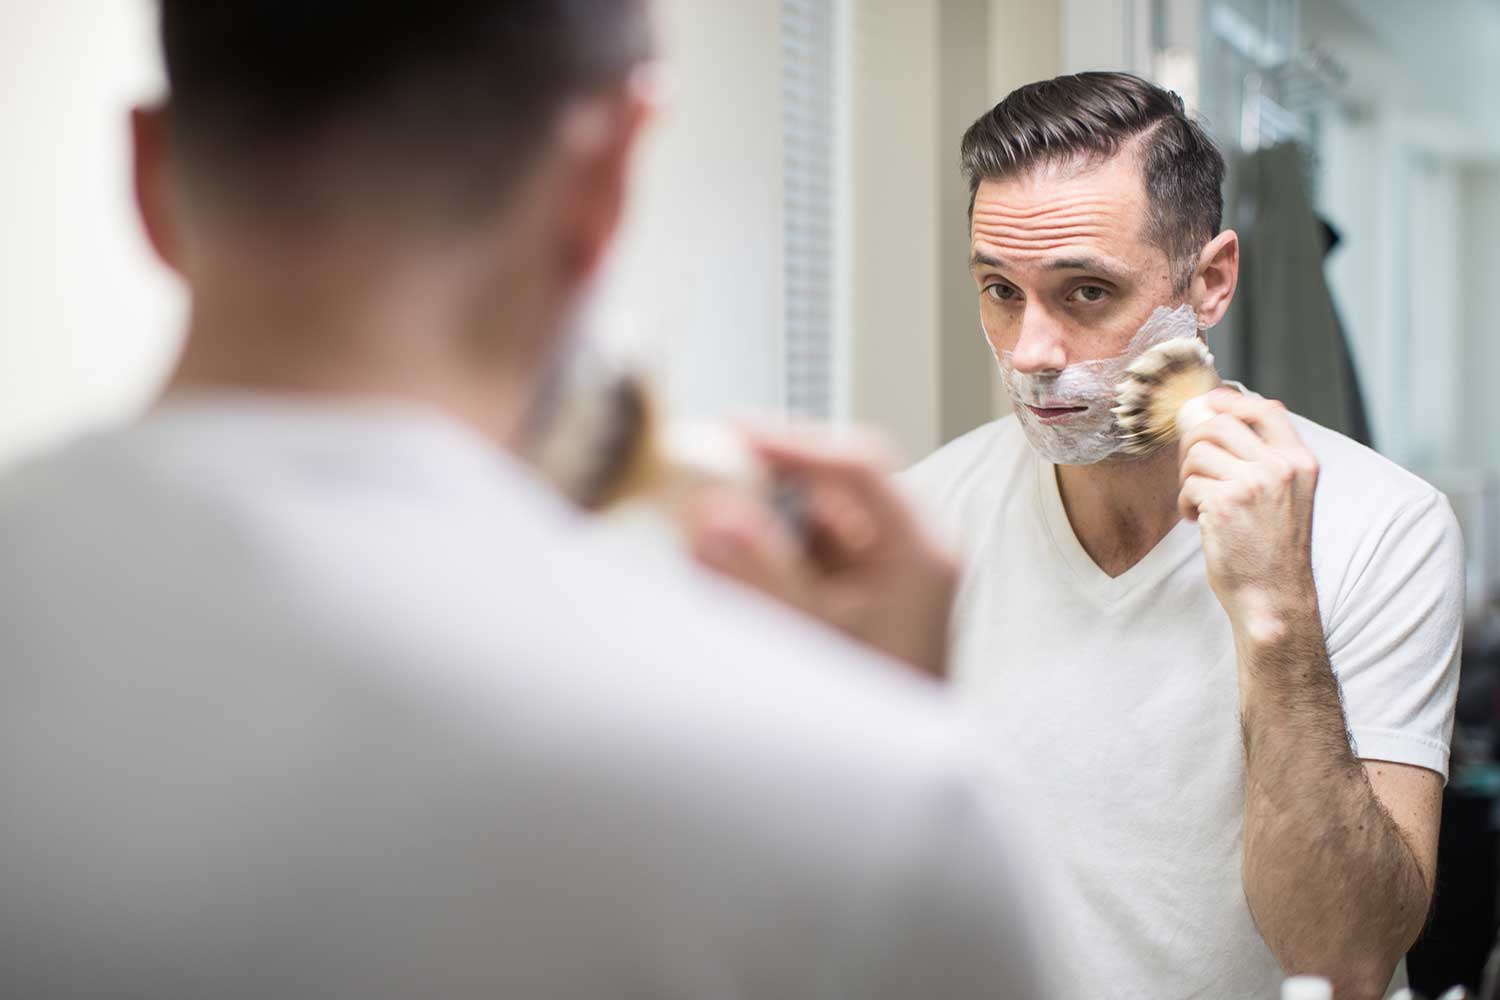 A man uses a shaving brush as part of skincare routine